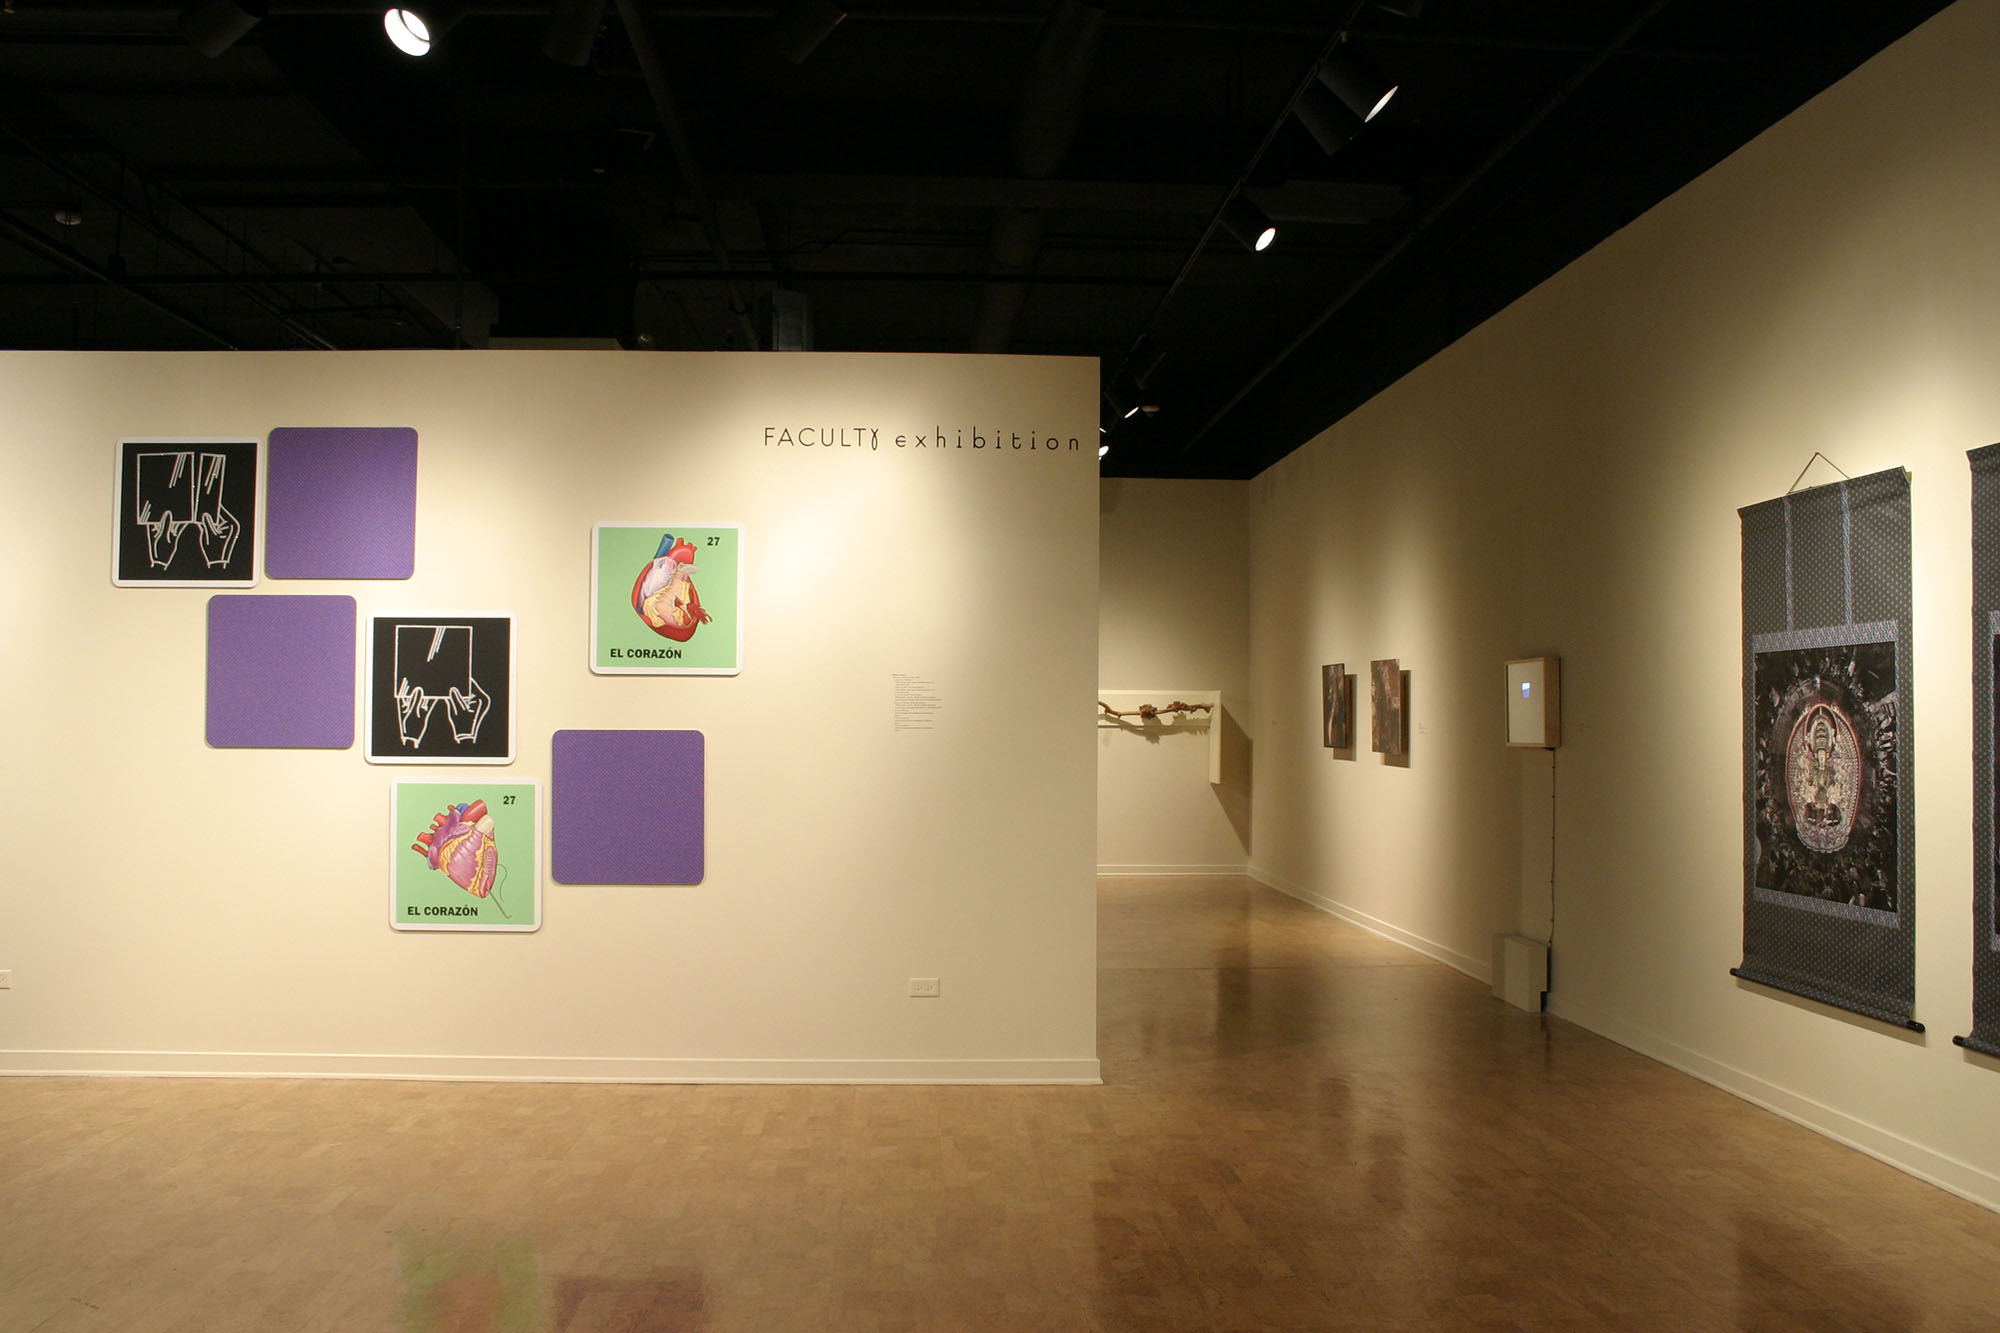 Installation view at the DePaul University Art Gallery